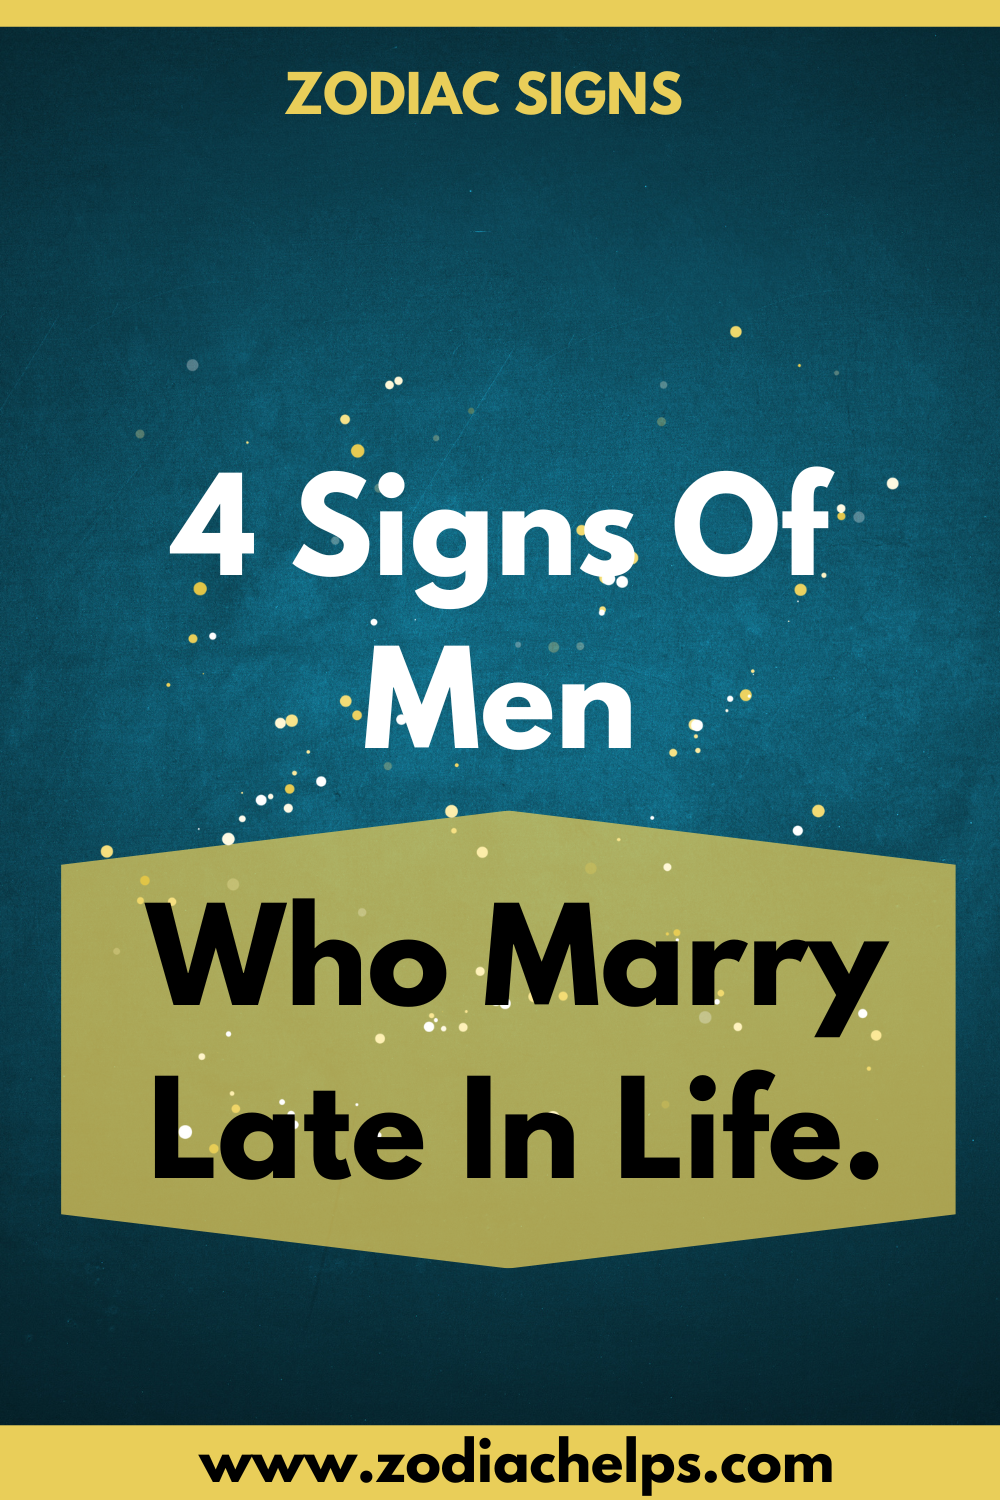 4 Signs Of Men Who Marry Late In Life.